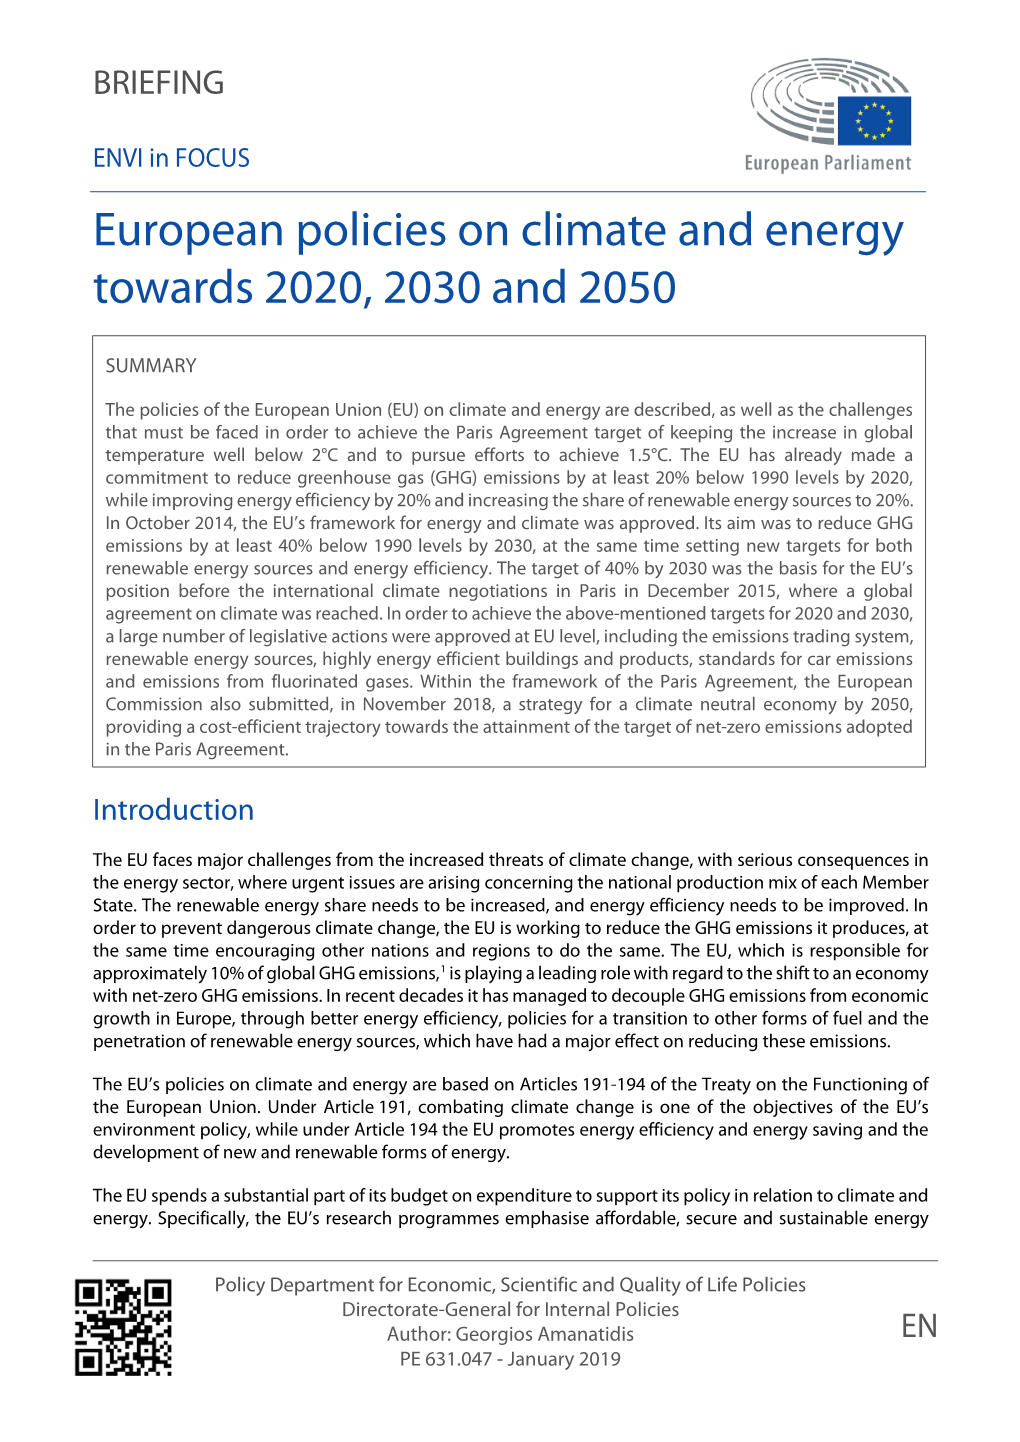 European Policies on Climate and Energy Towards 2020, 2030 and 2050